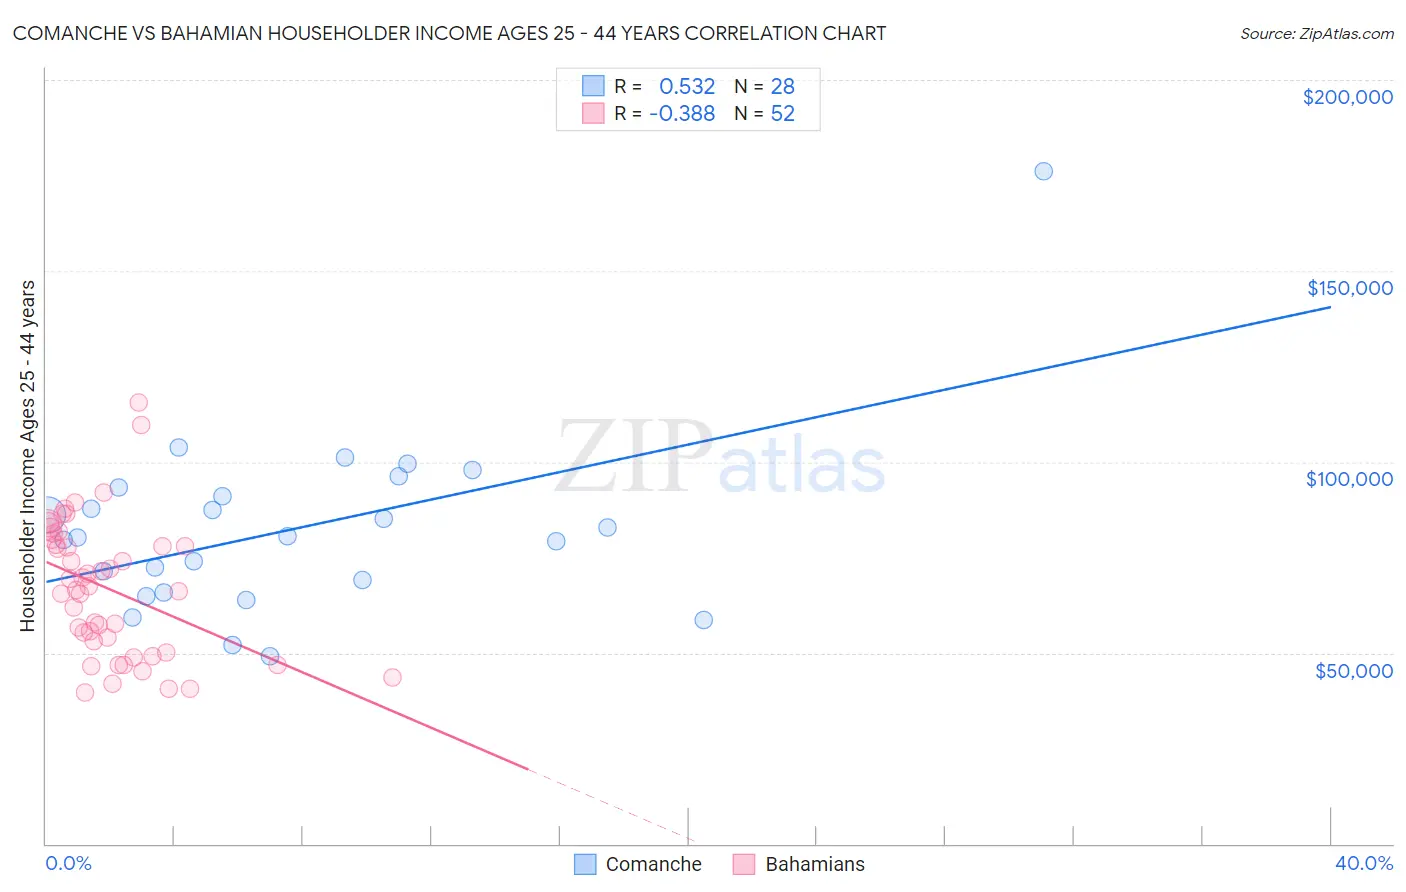 Comanche vs Bahamian Householder Income Ages 25 - 44 years